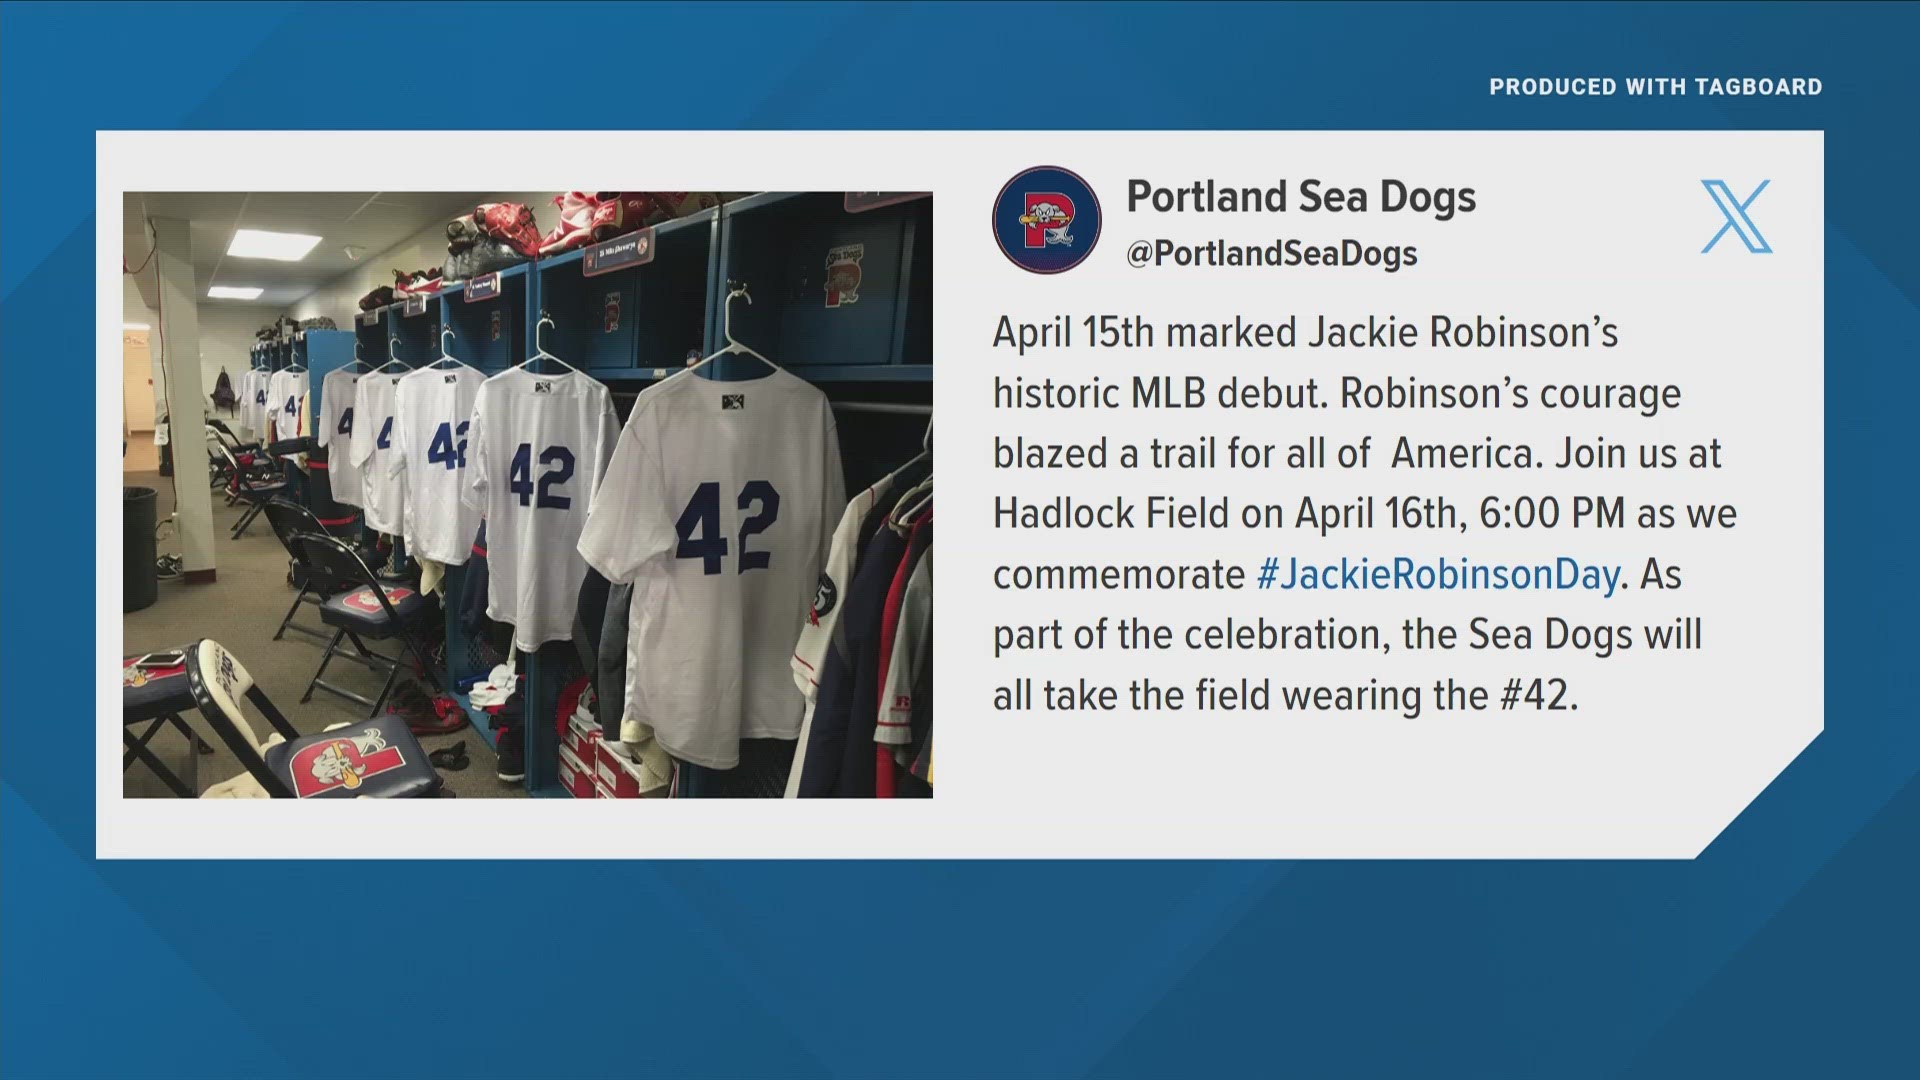 April 15 marks the first time Robinson took the field as an MLB player. Sea Dogs players will wear his number, 42, on the back of their jerseys during Tuesday's game